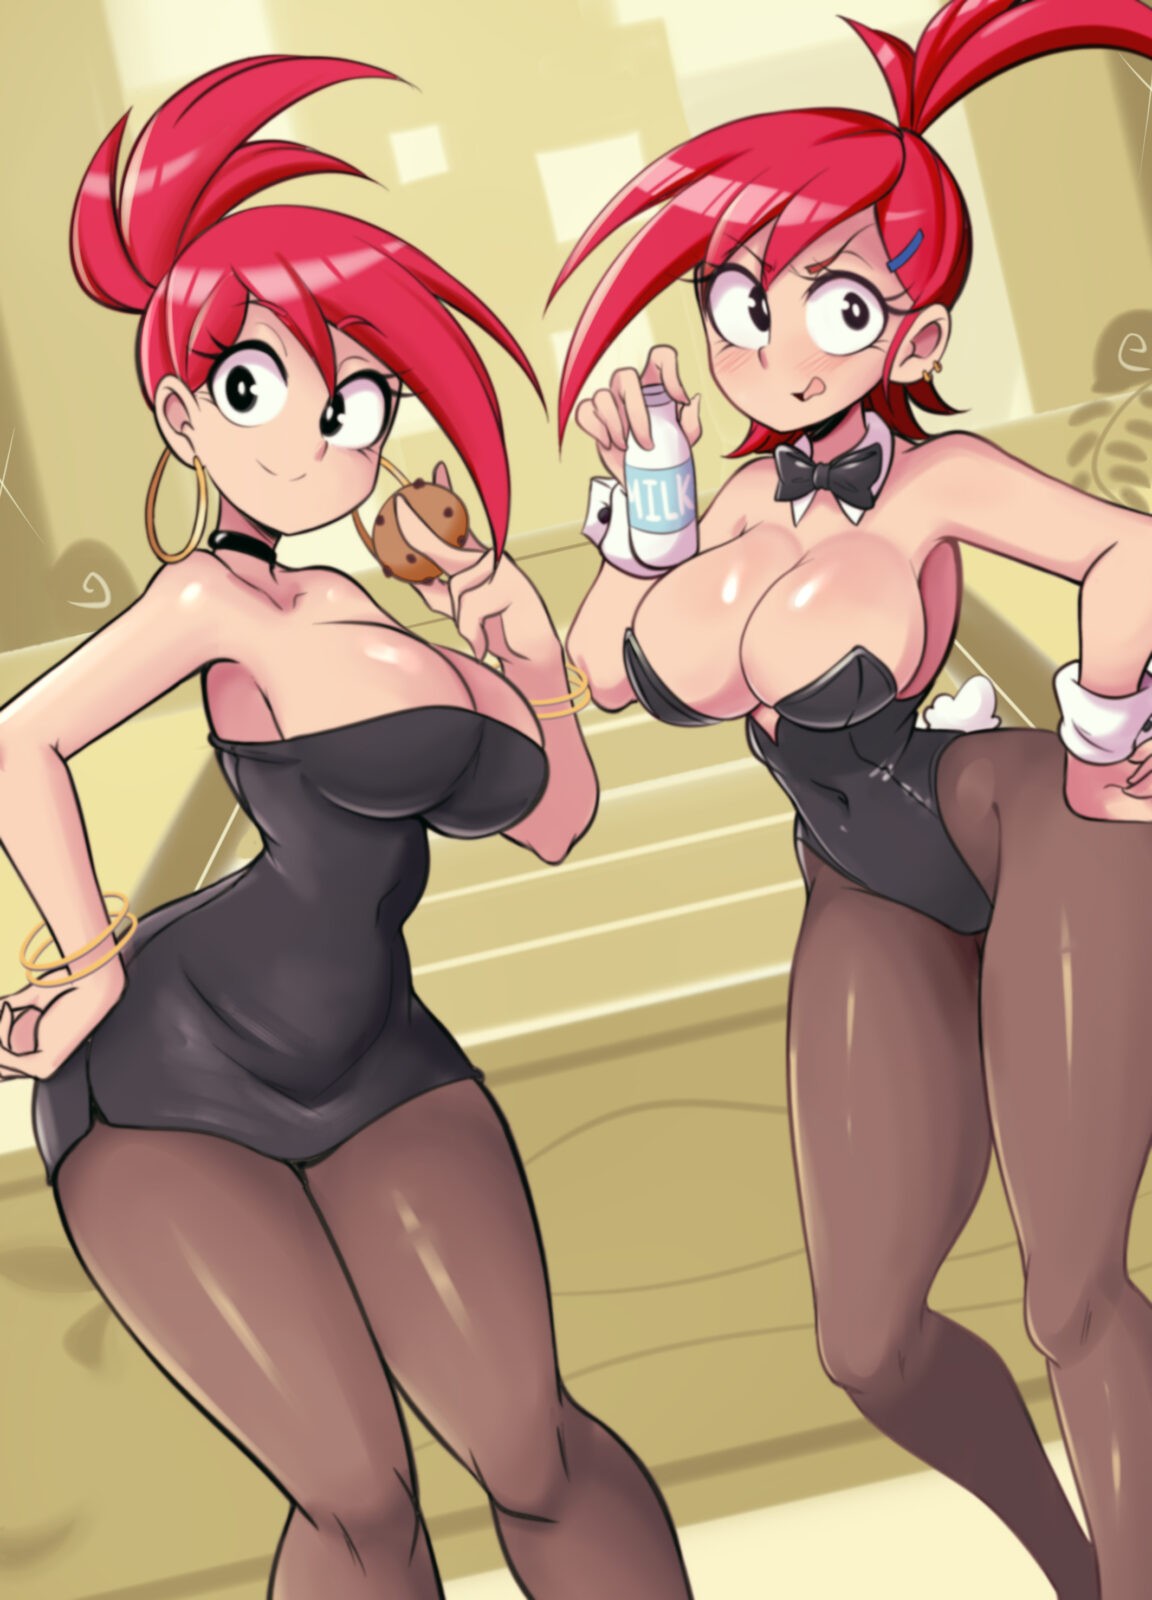 Frankie Foster, Friend Frankie - black mini dress and a cookie or bunny girl suit and milk (Lucyfer) [Foster's home for imaginary friends]